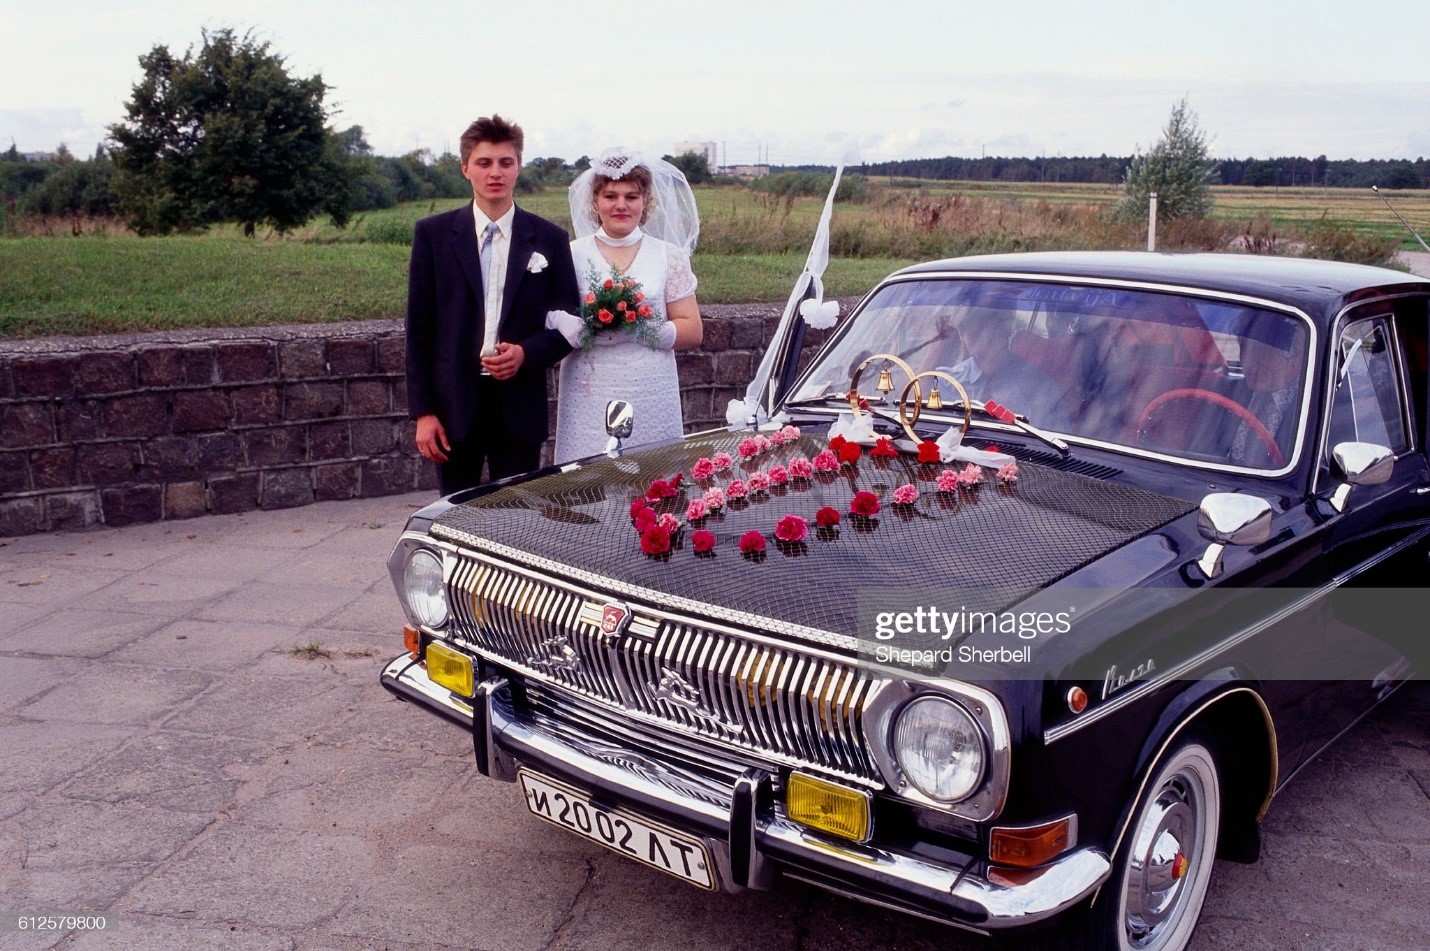 A bride and groom, in Latvia, pose for a portrait next to their bridal limousine decorated with flowers and large wedding rings in 1991. 